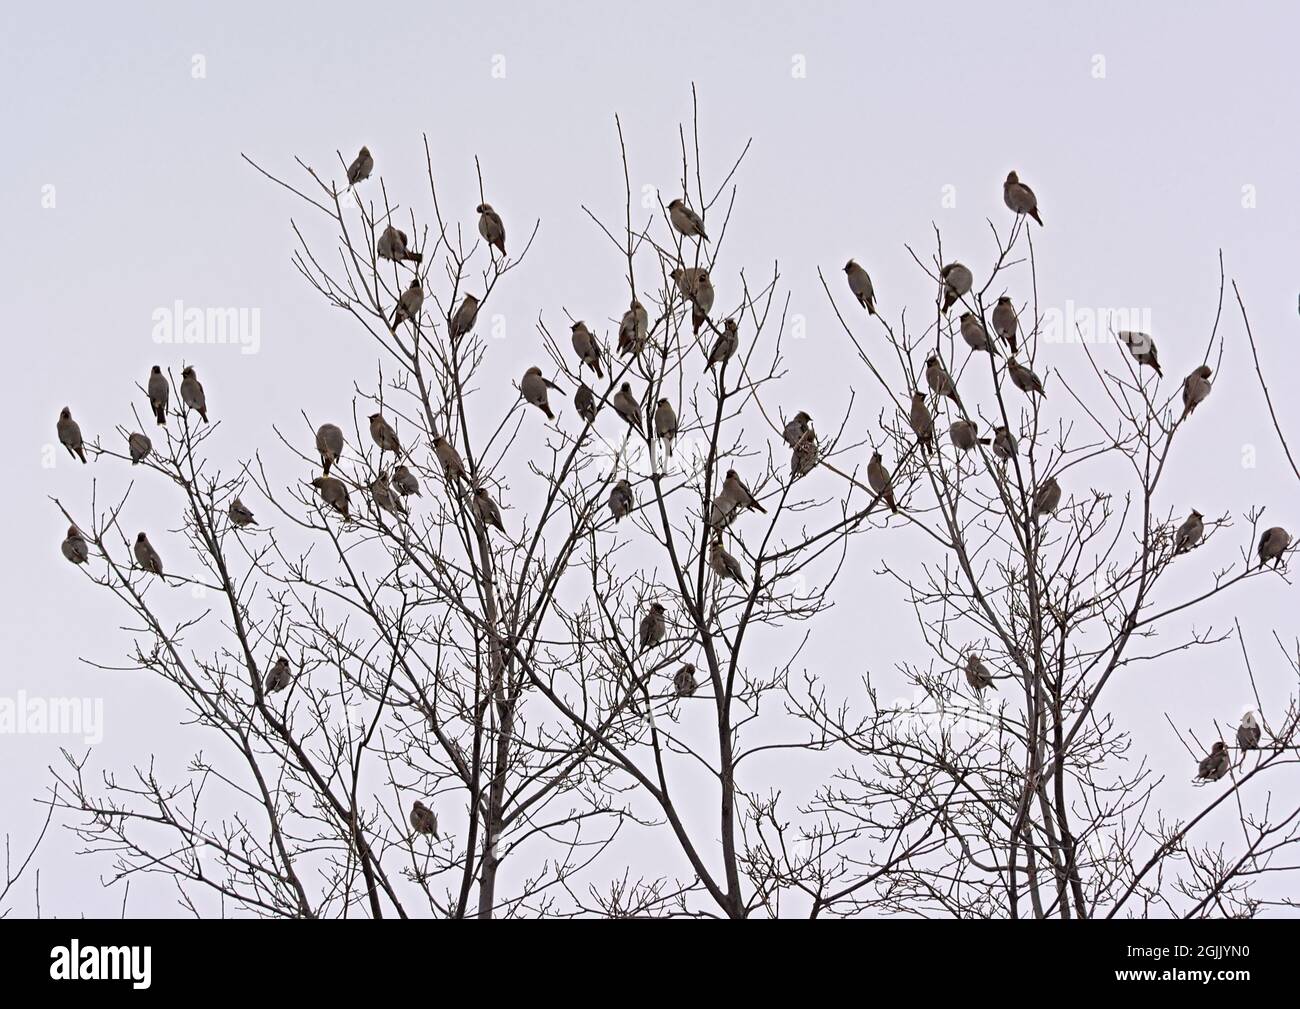 Group of Caridnals sitting on the branches of a bare tree with grey sky background Stock Photo